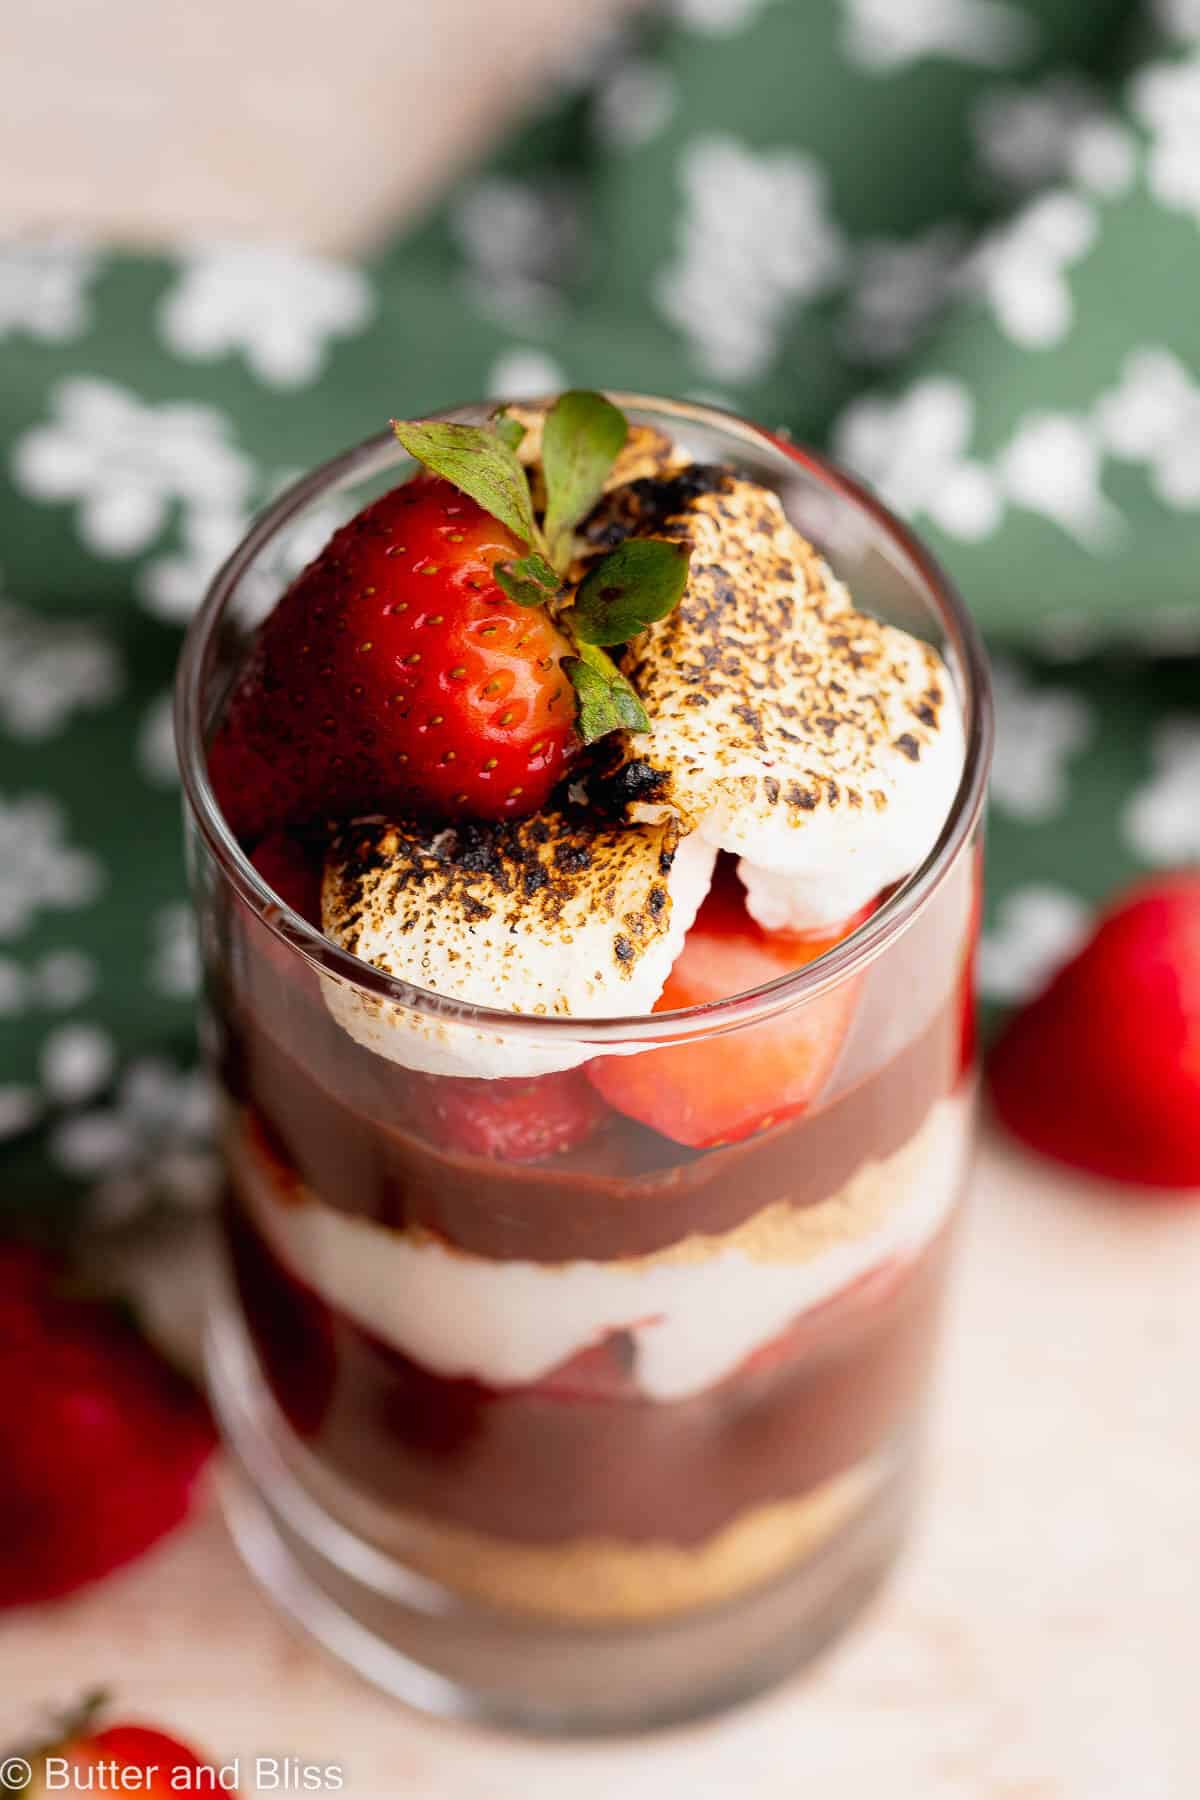 Top view of strawberry smores parfait with toasted marshmallows